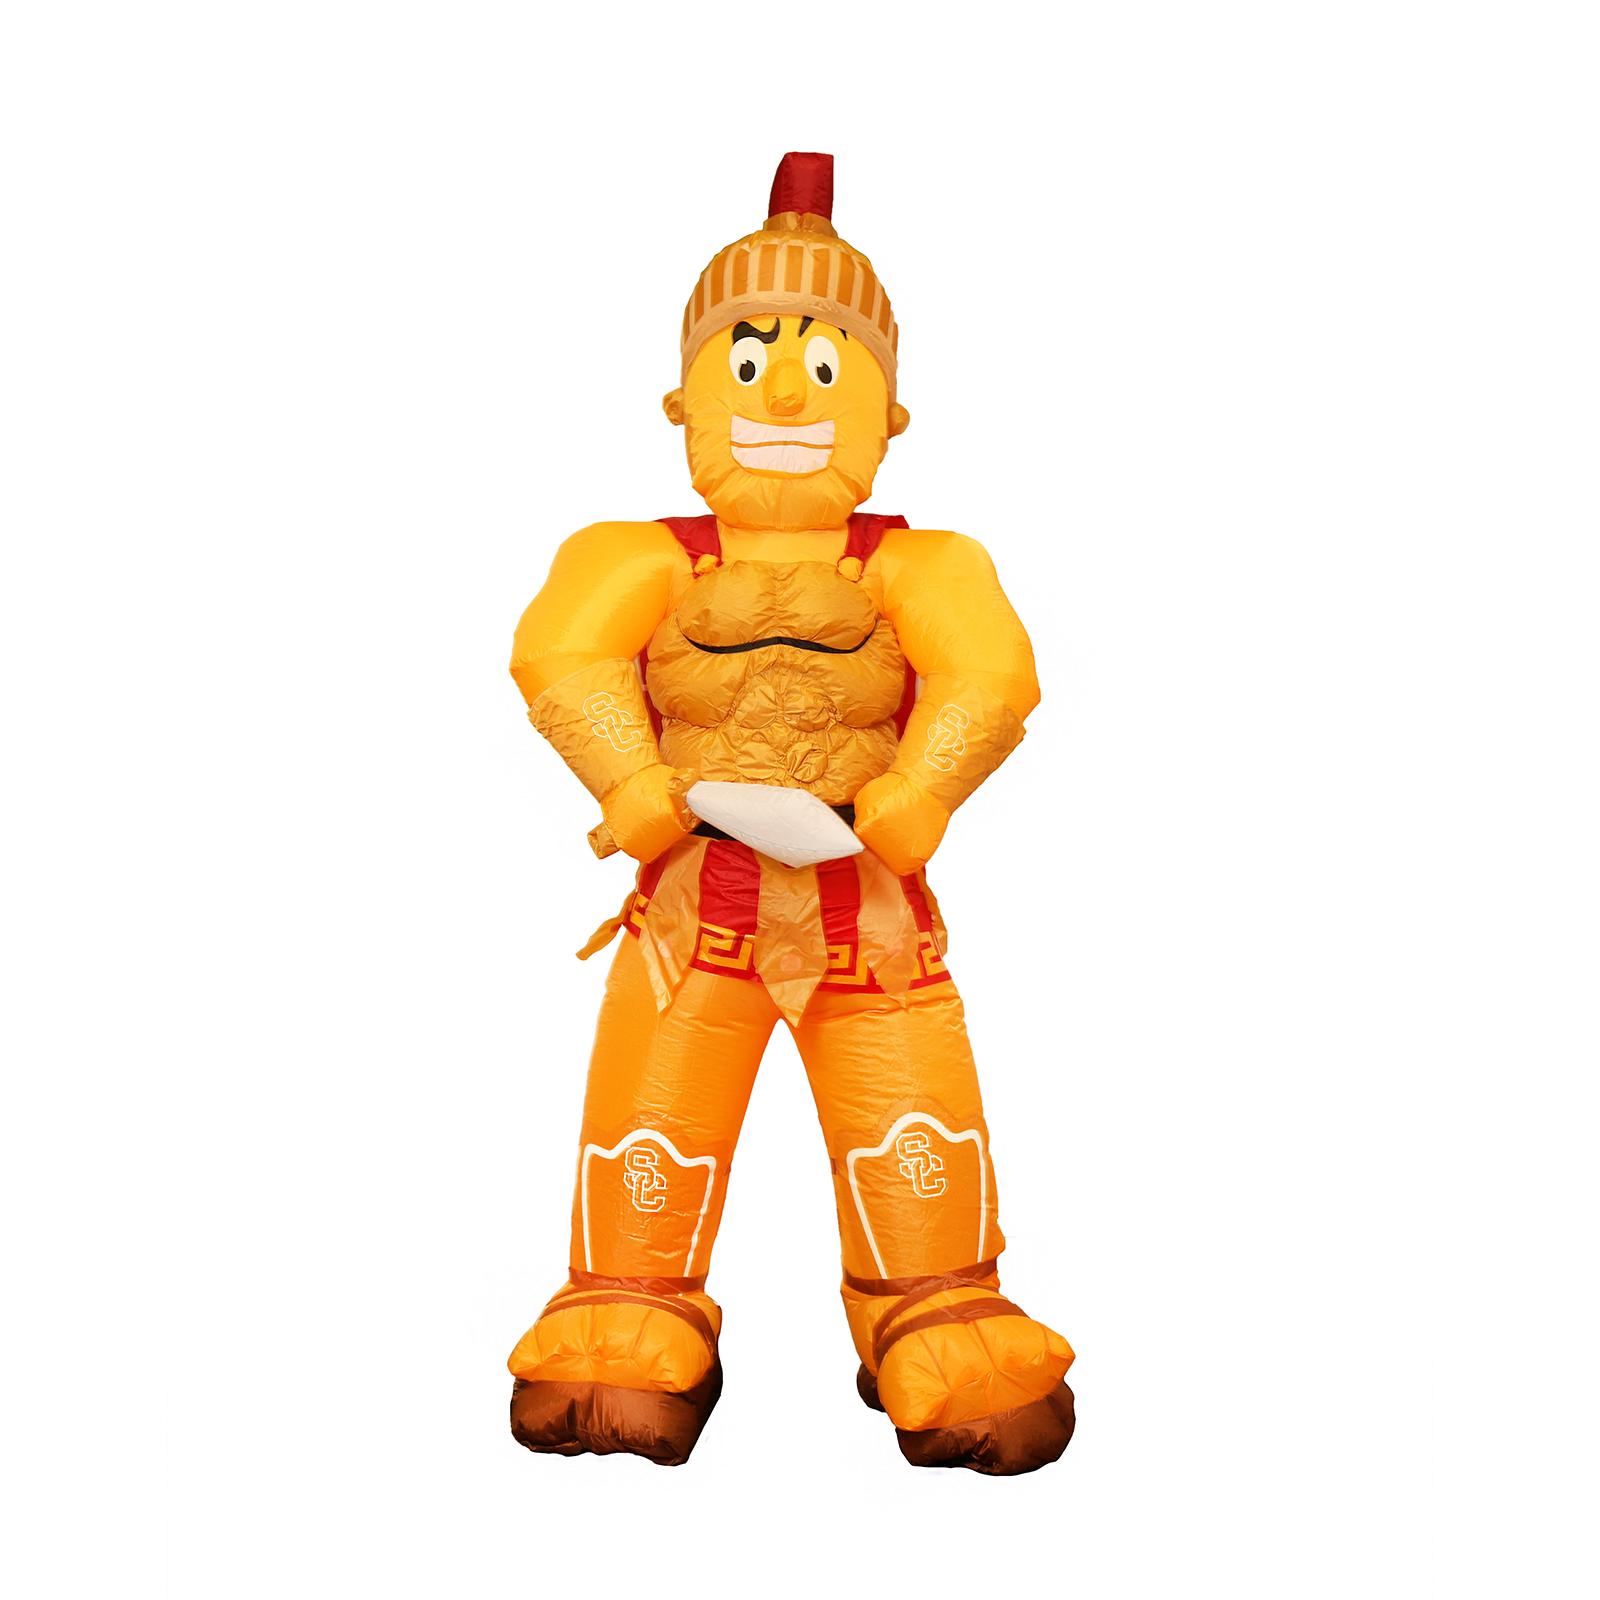 USC Tommy Trojan Inflatable Mascot image01